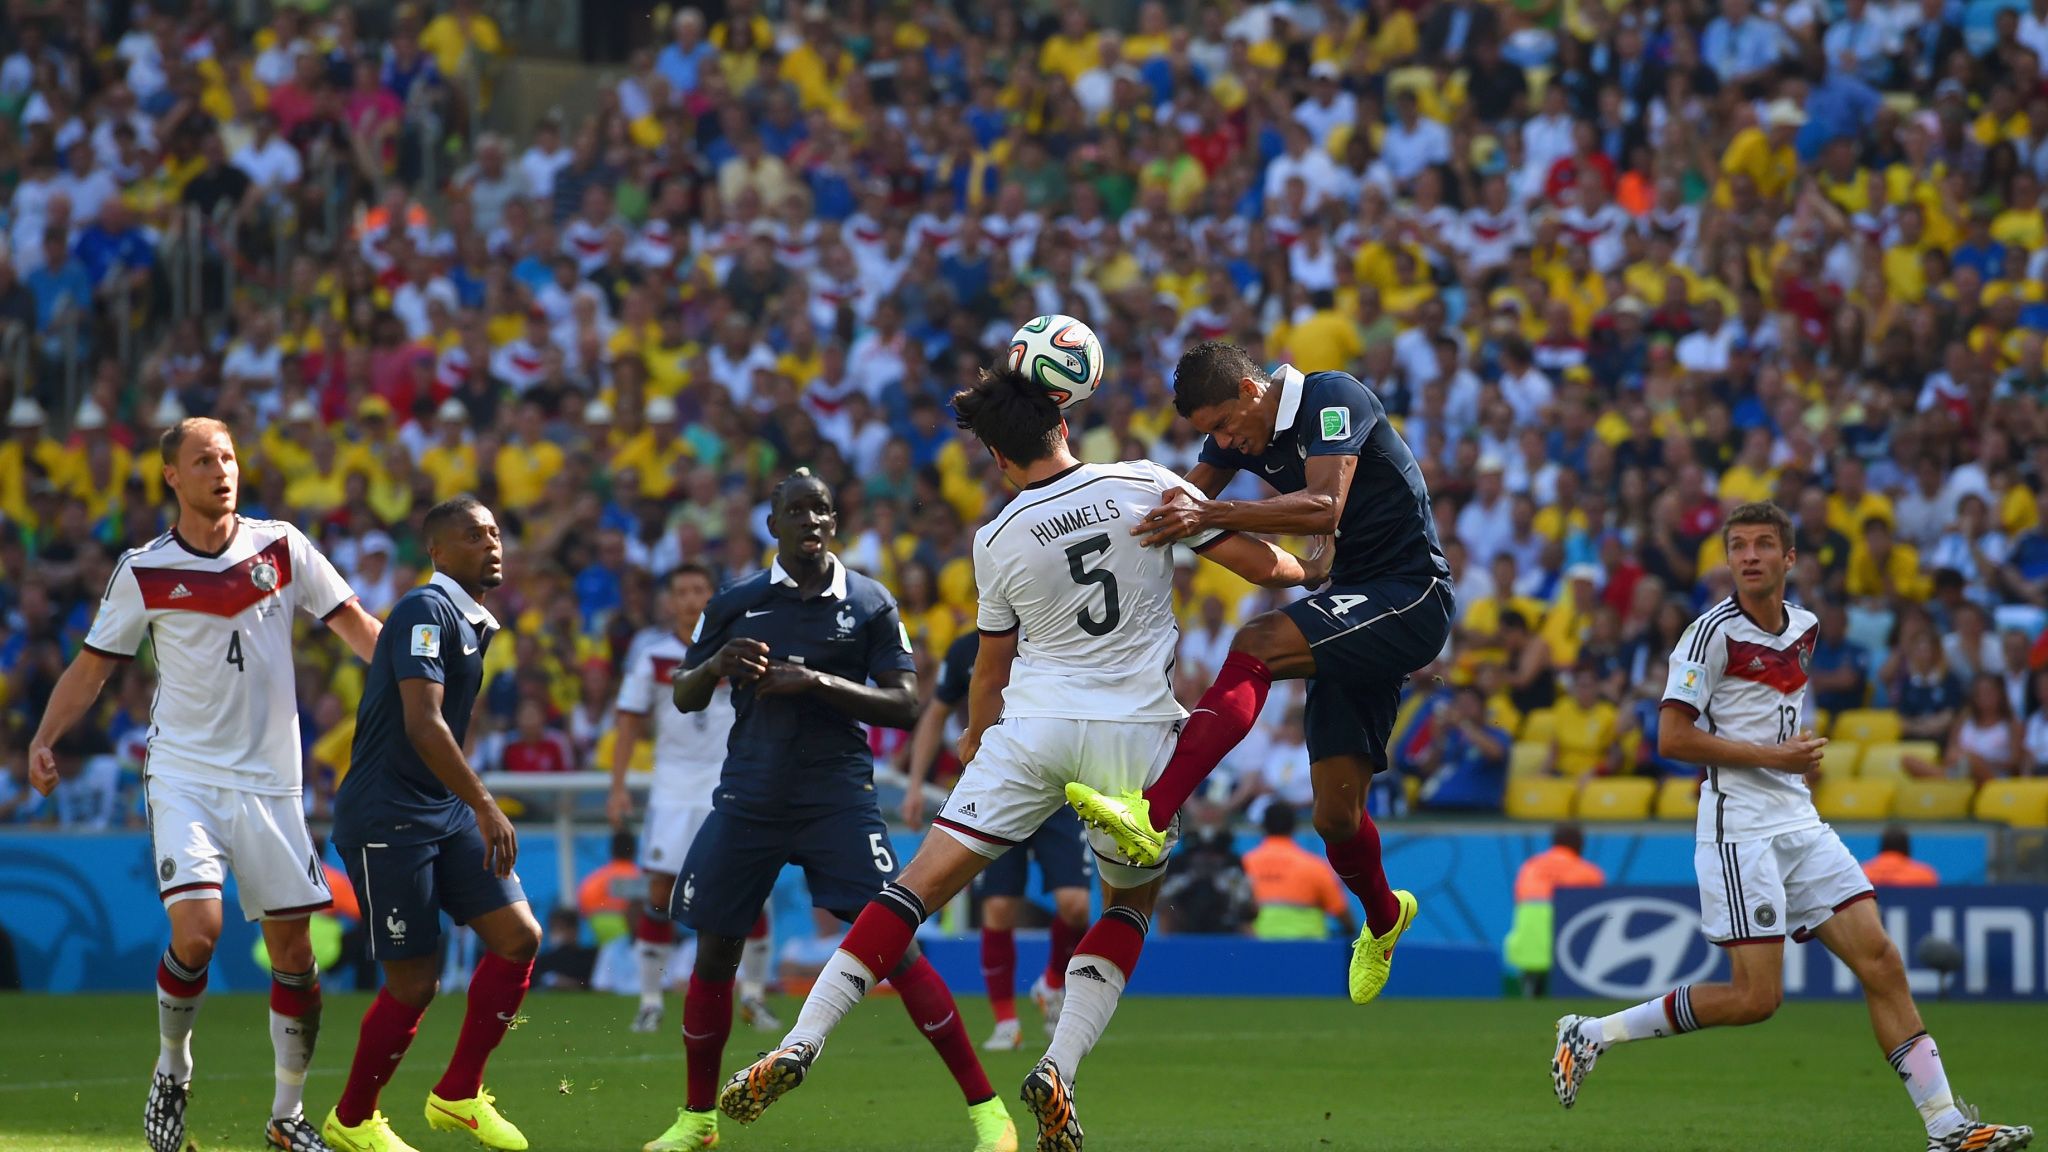 World Cup: Hummels goal gives Germany 1-0 quarter-final win over France | Football News | Sky Sports